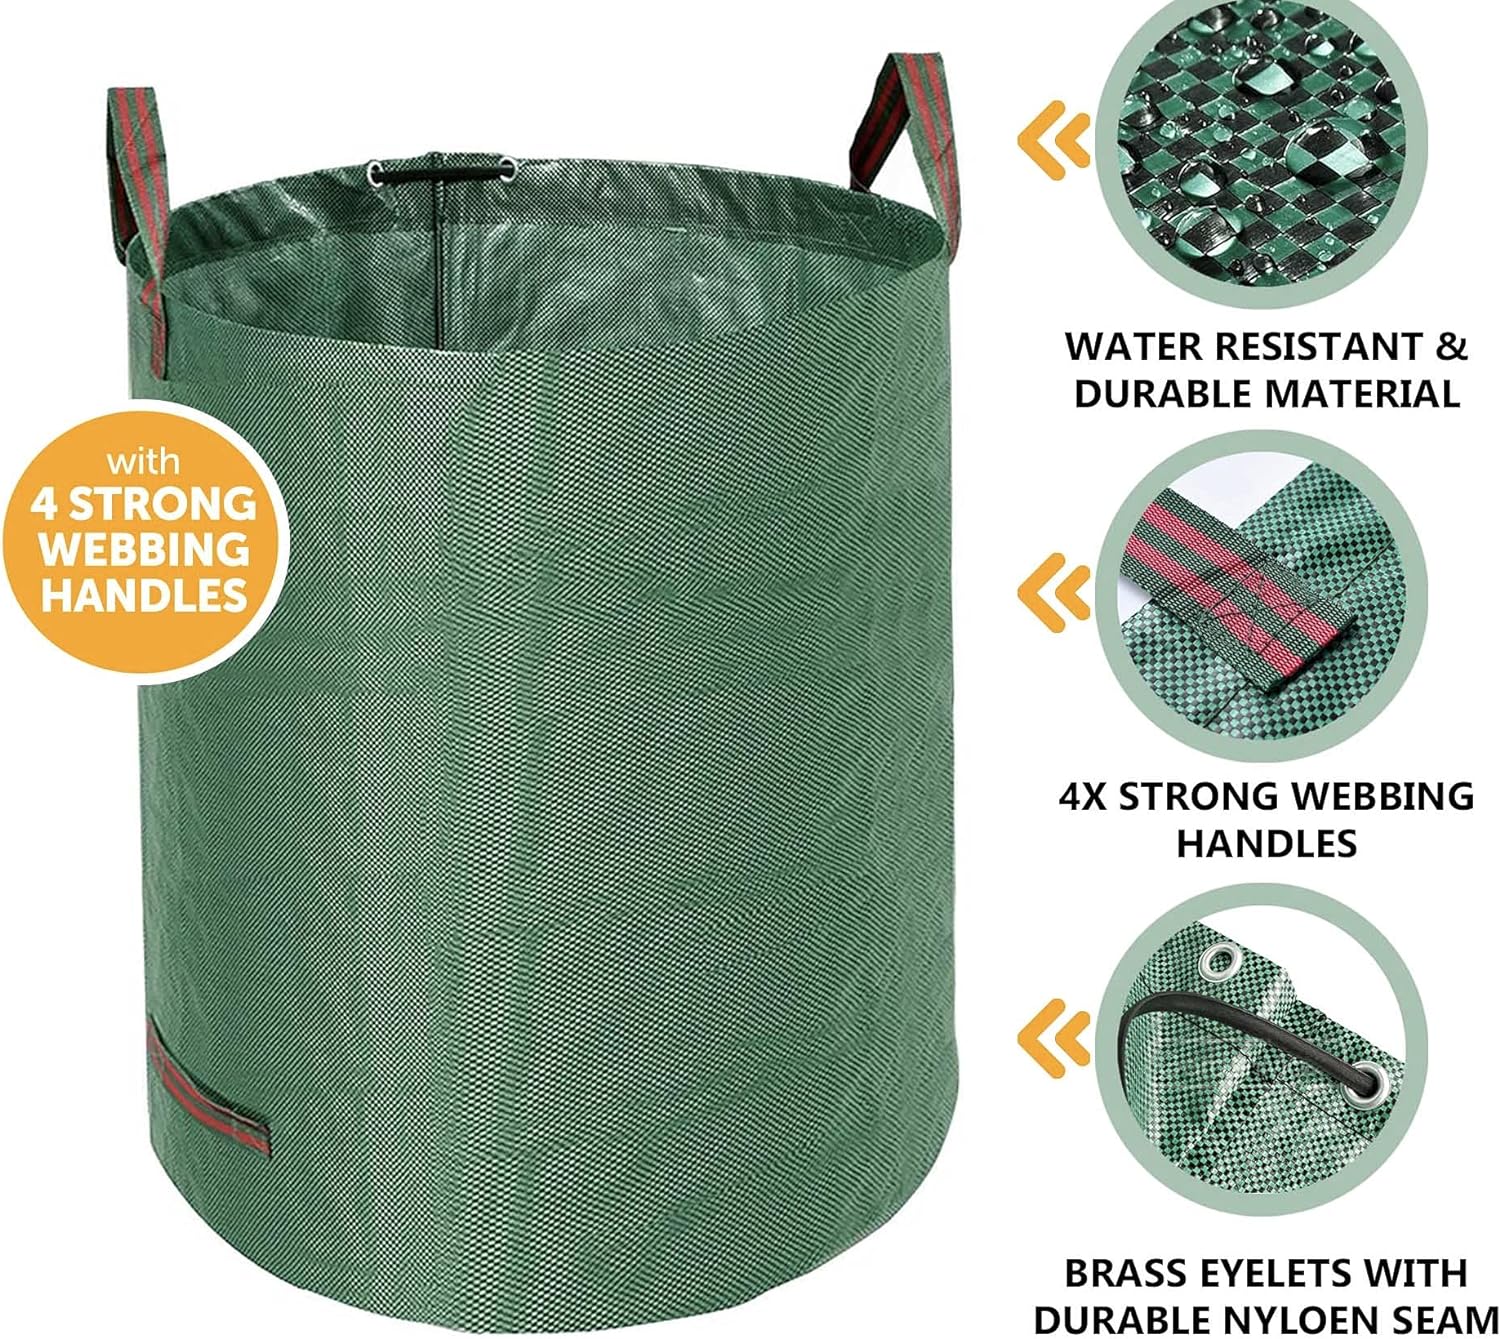 ADEPTNA Reusable Heavy Duty Garden Bag Waste Rubbish Grass Sack Waterproof Large with 4 Strong Webbing Handles (300L Capacity)